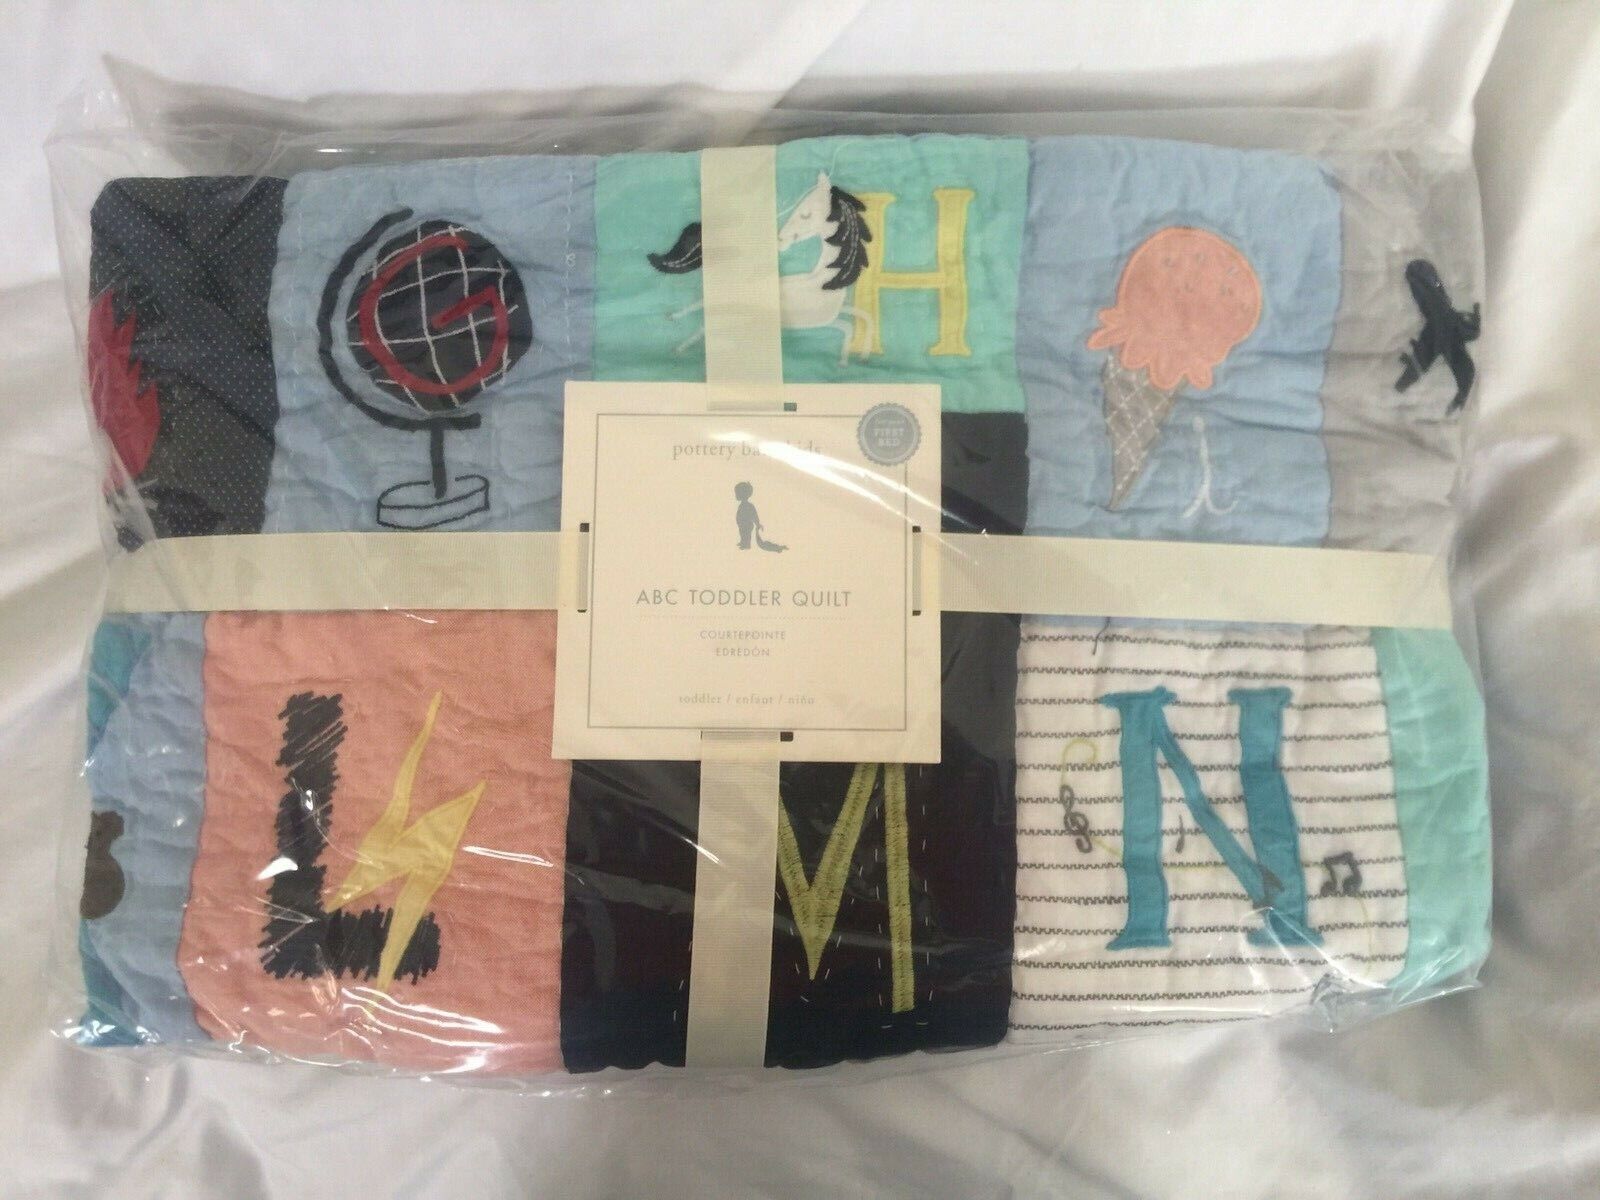 Pottery Barn Kids ABC Toddler Quilt New Super Max 74% OFF Special SALE held With Tags